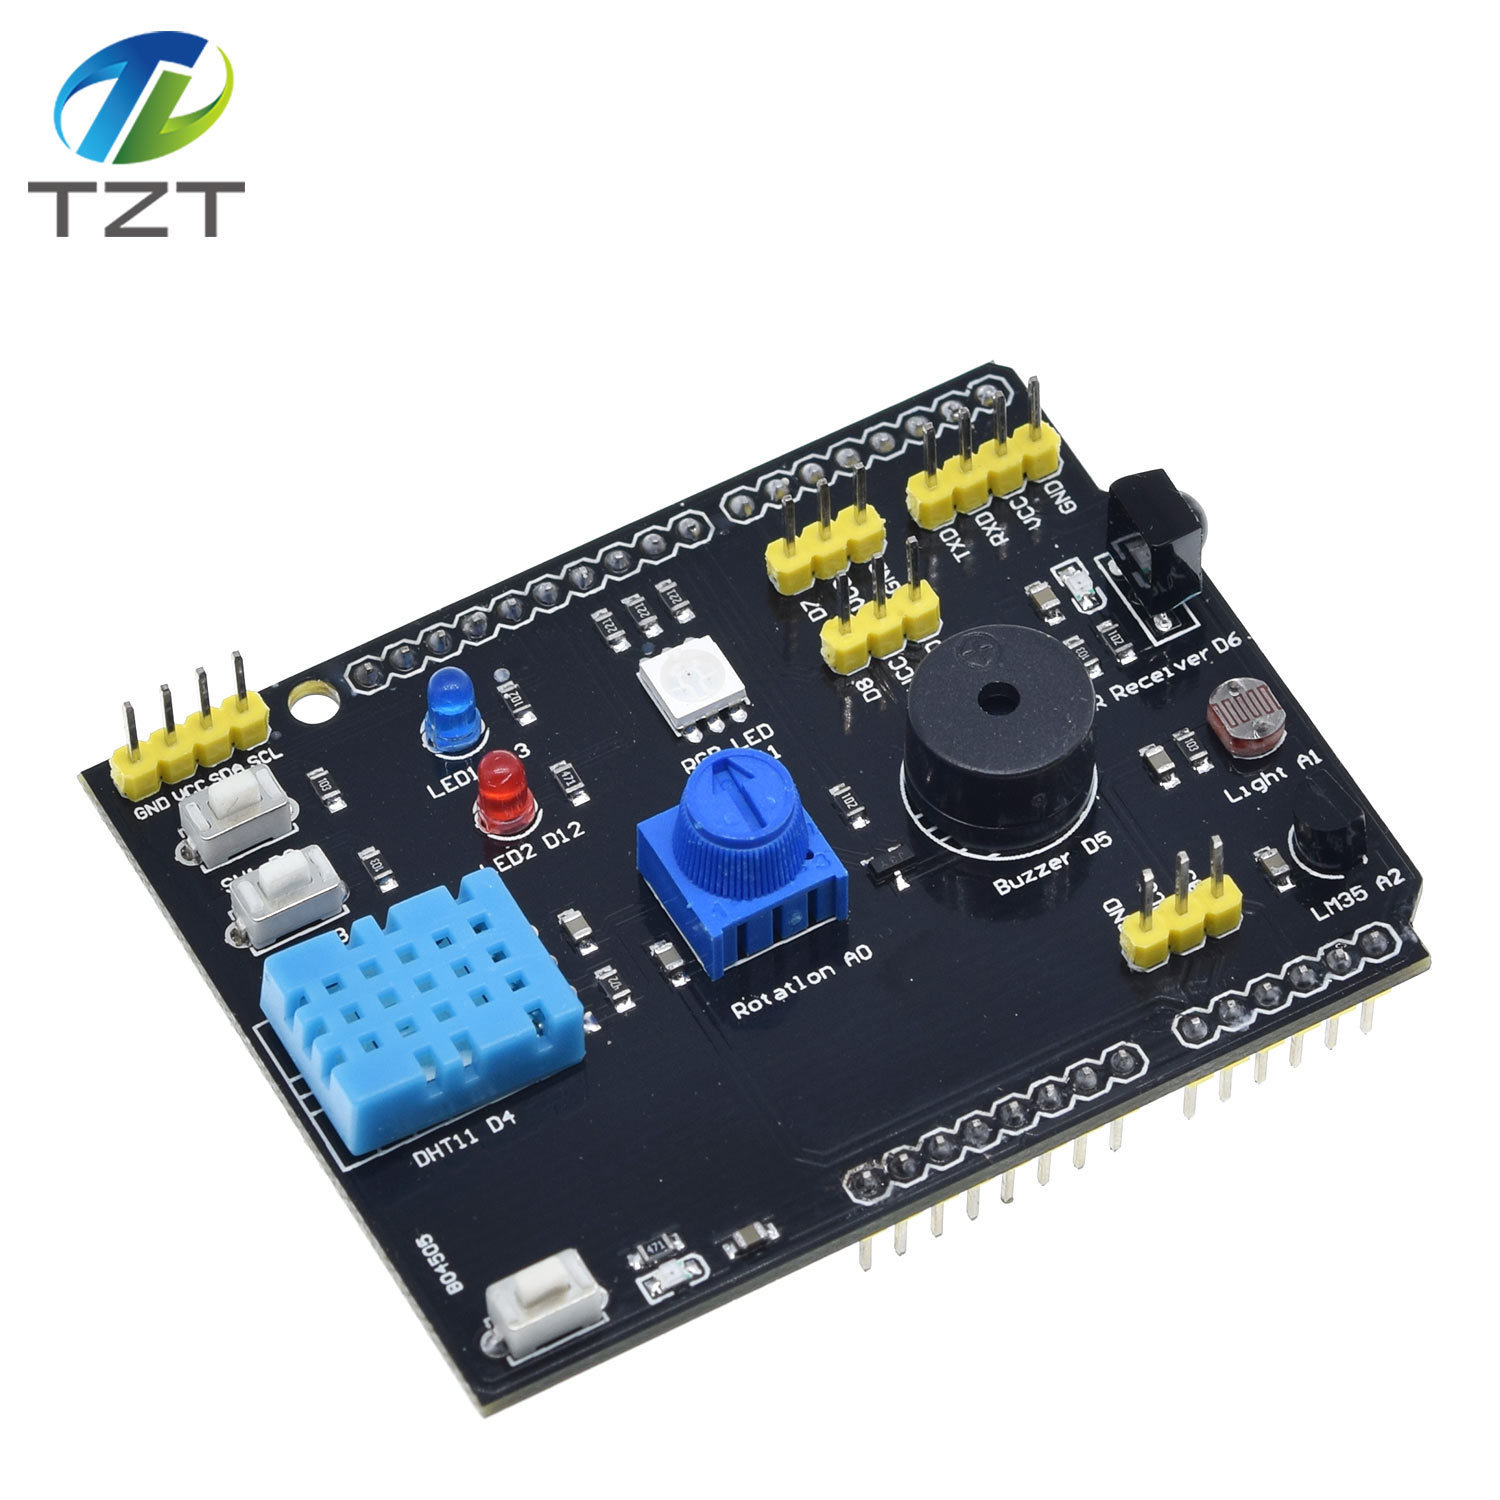 TZT 9 in 1 sensor board Multifunction Expansion Board DHT11 LM35 Temperature Humidity For Arduino UNO RGB LED IR Receiver Buzzer